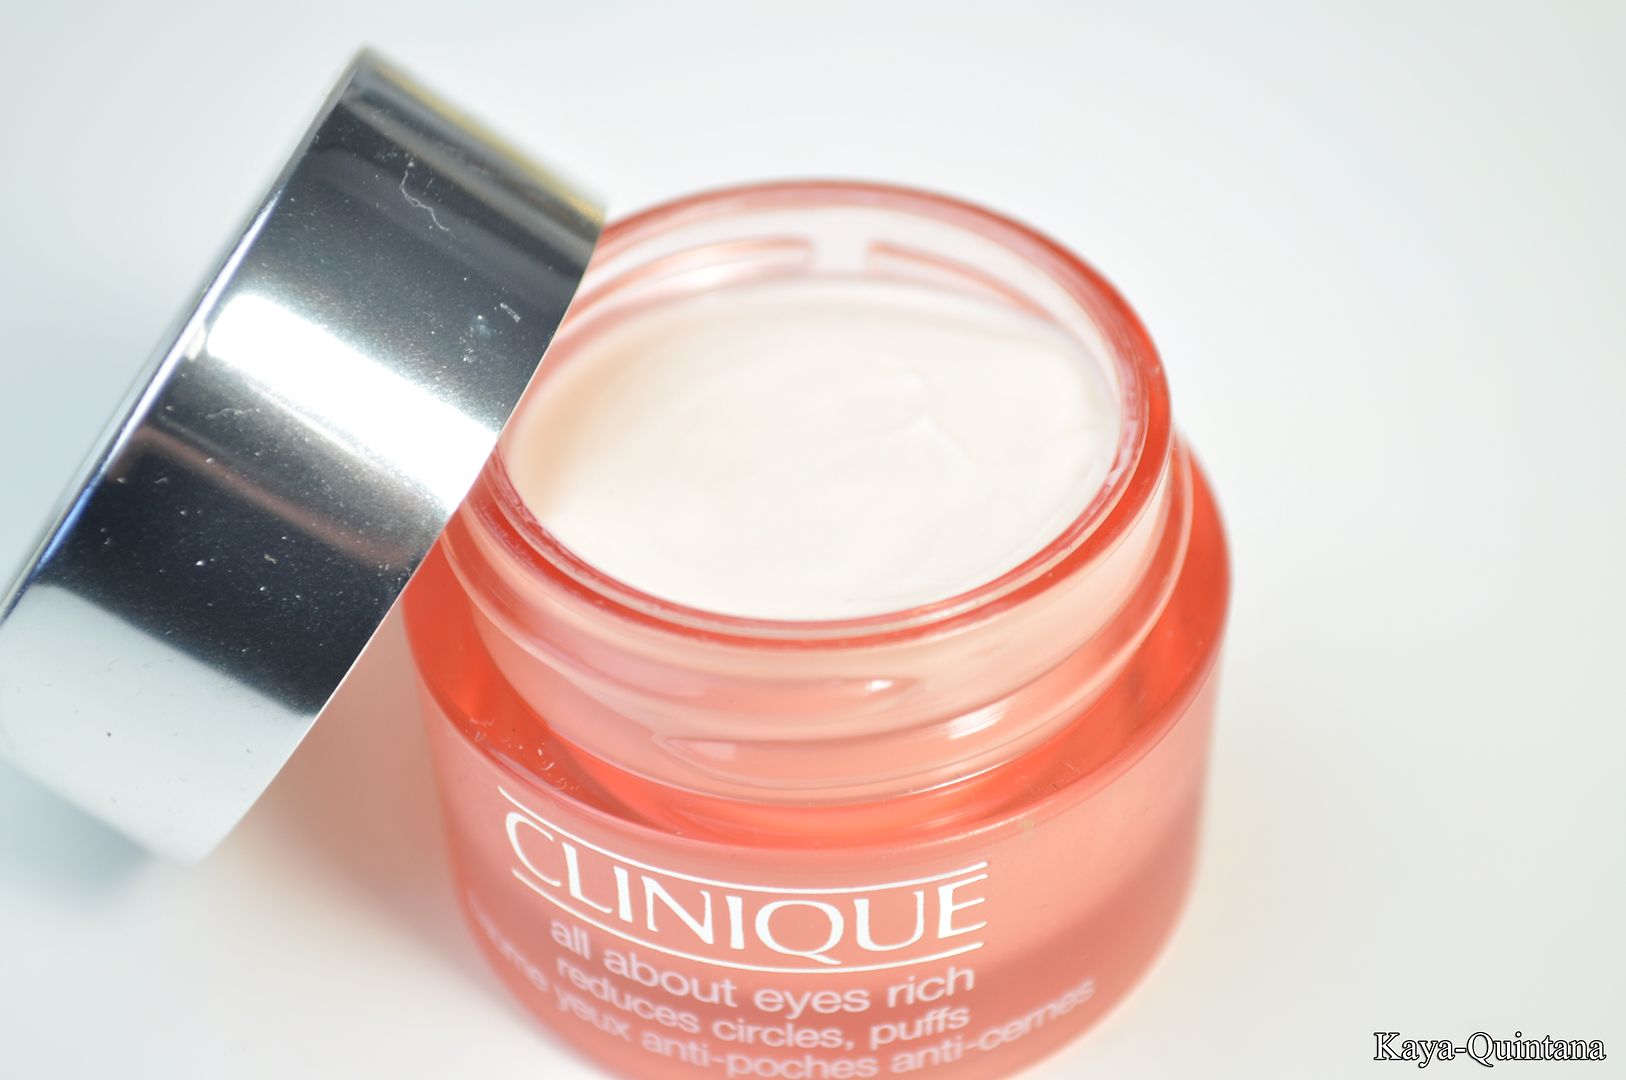 clinique all about eyes rich review